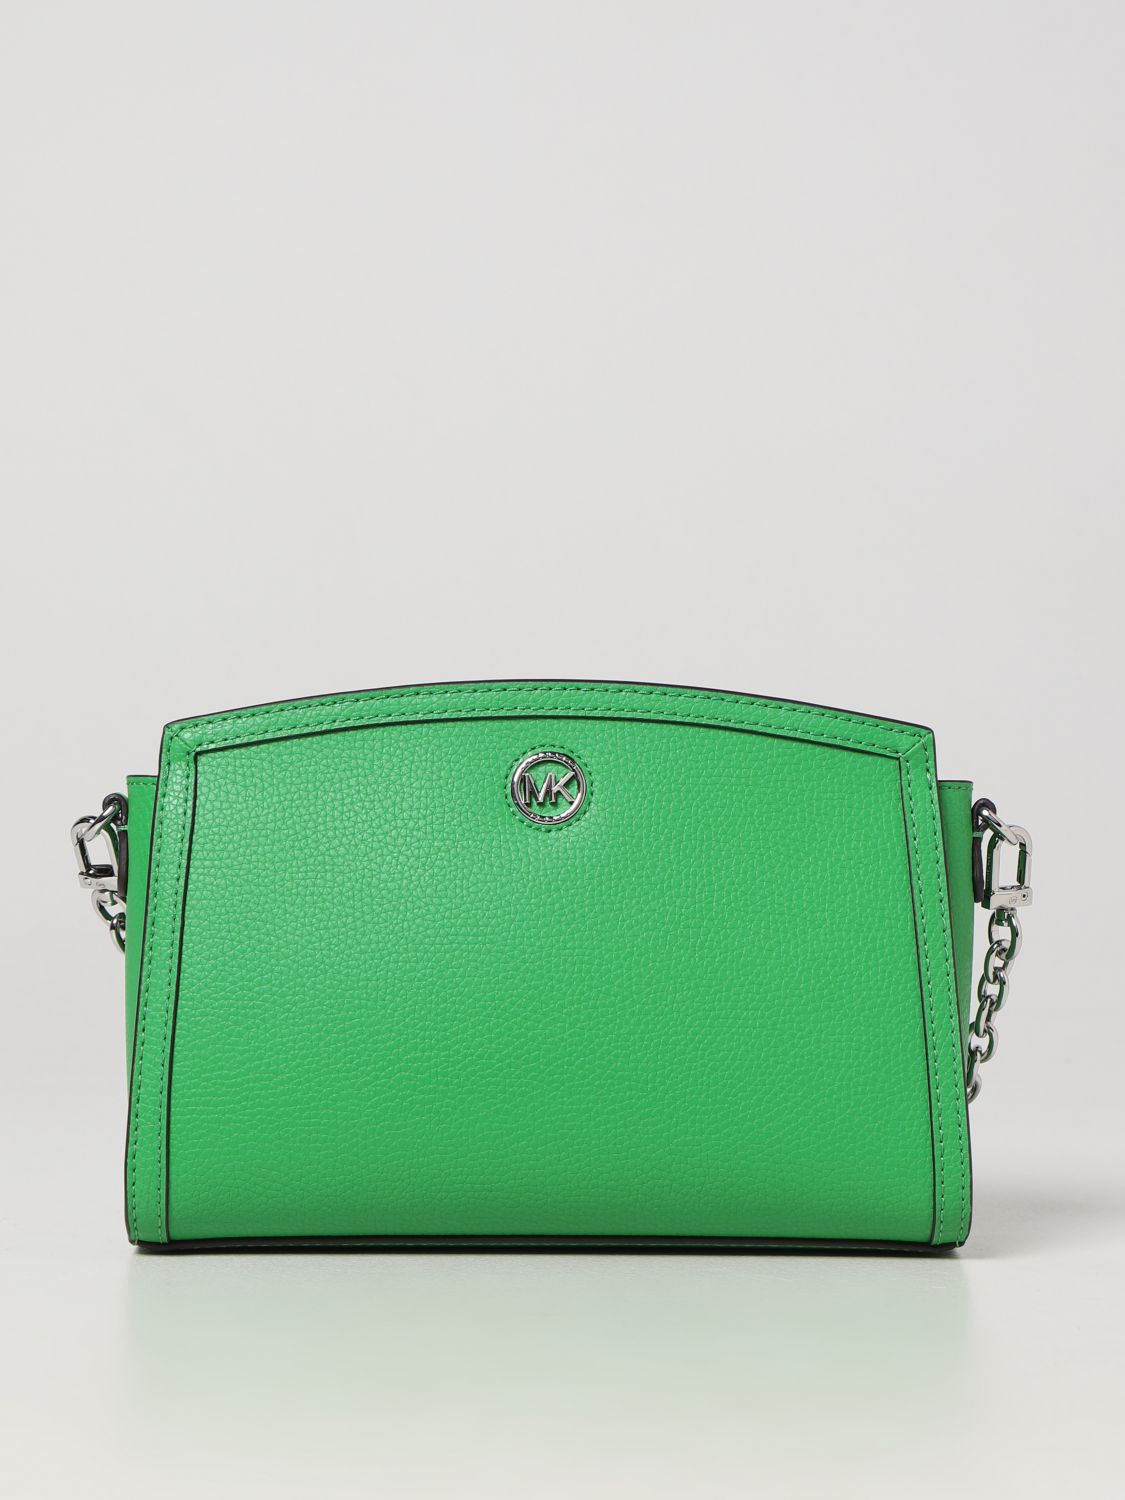 Michael Kors Outlet: Michael Chantal bag in leather - Green | Michael ...